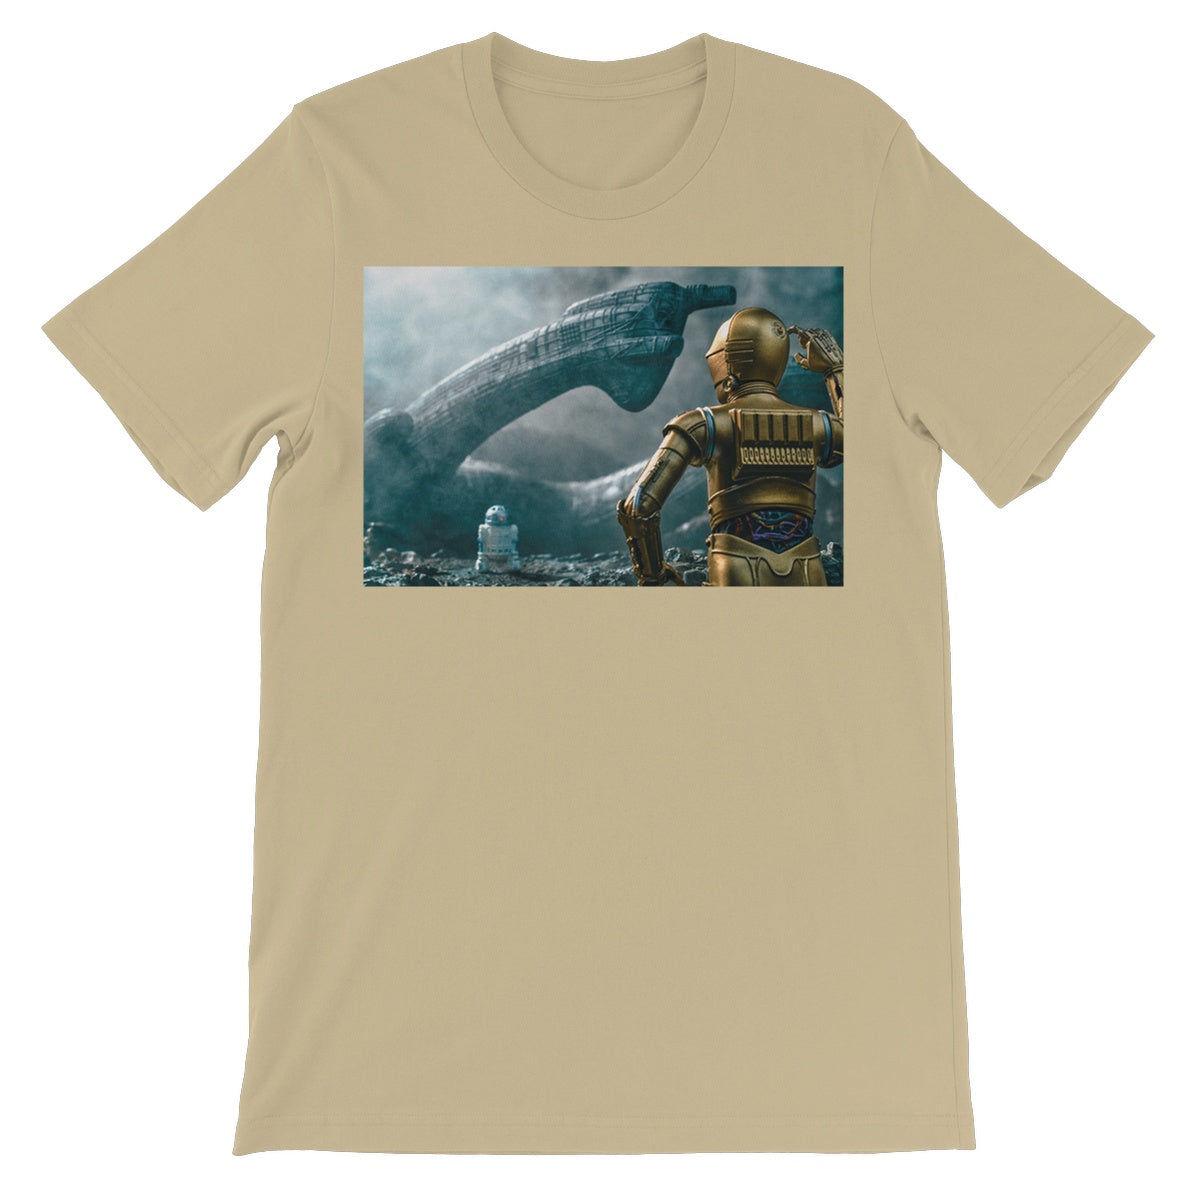 No More Adventures Illustrated Tee Unisex Short Sleeve T-Shirt